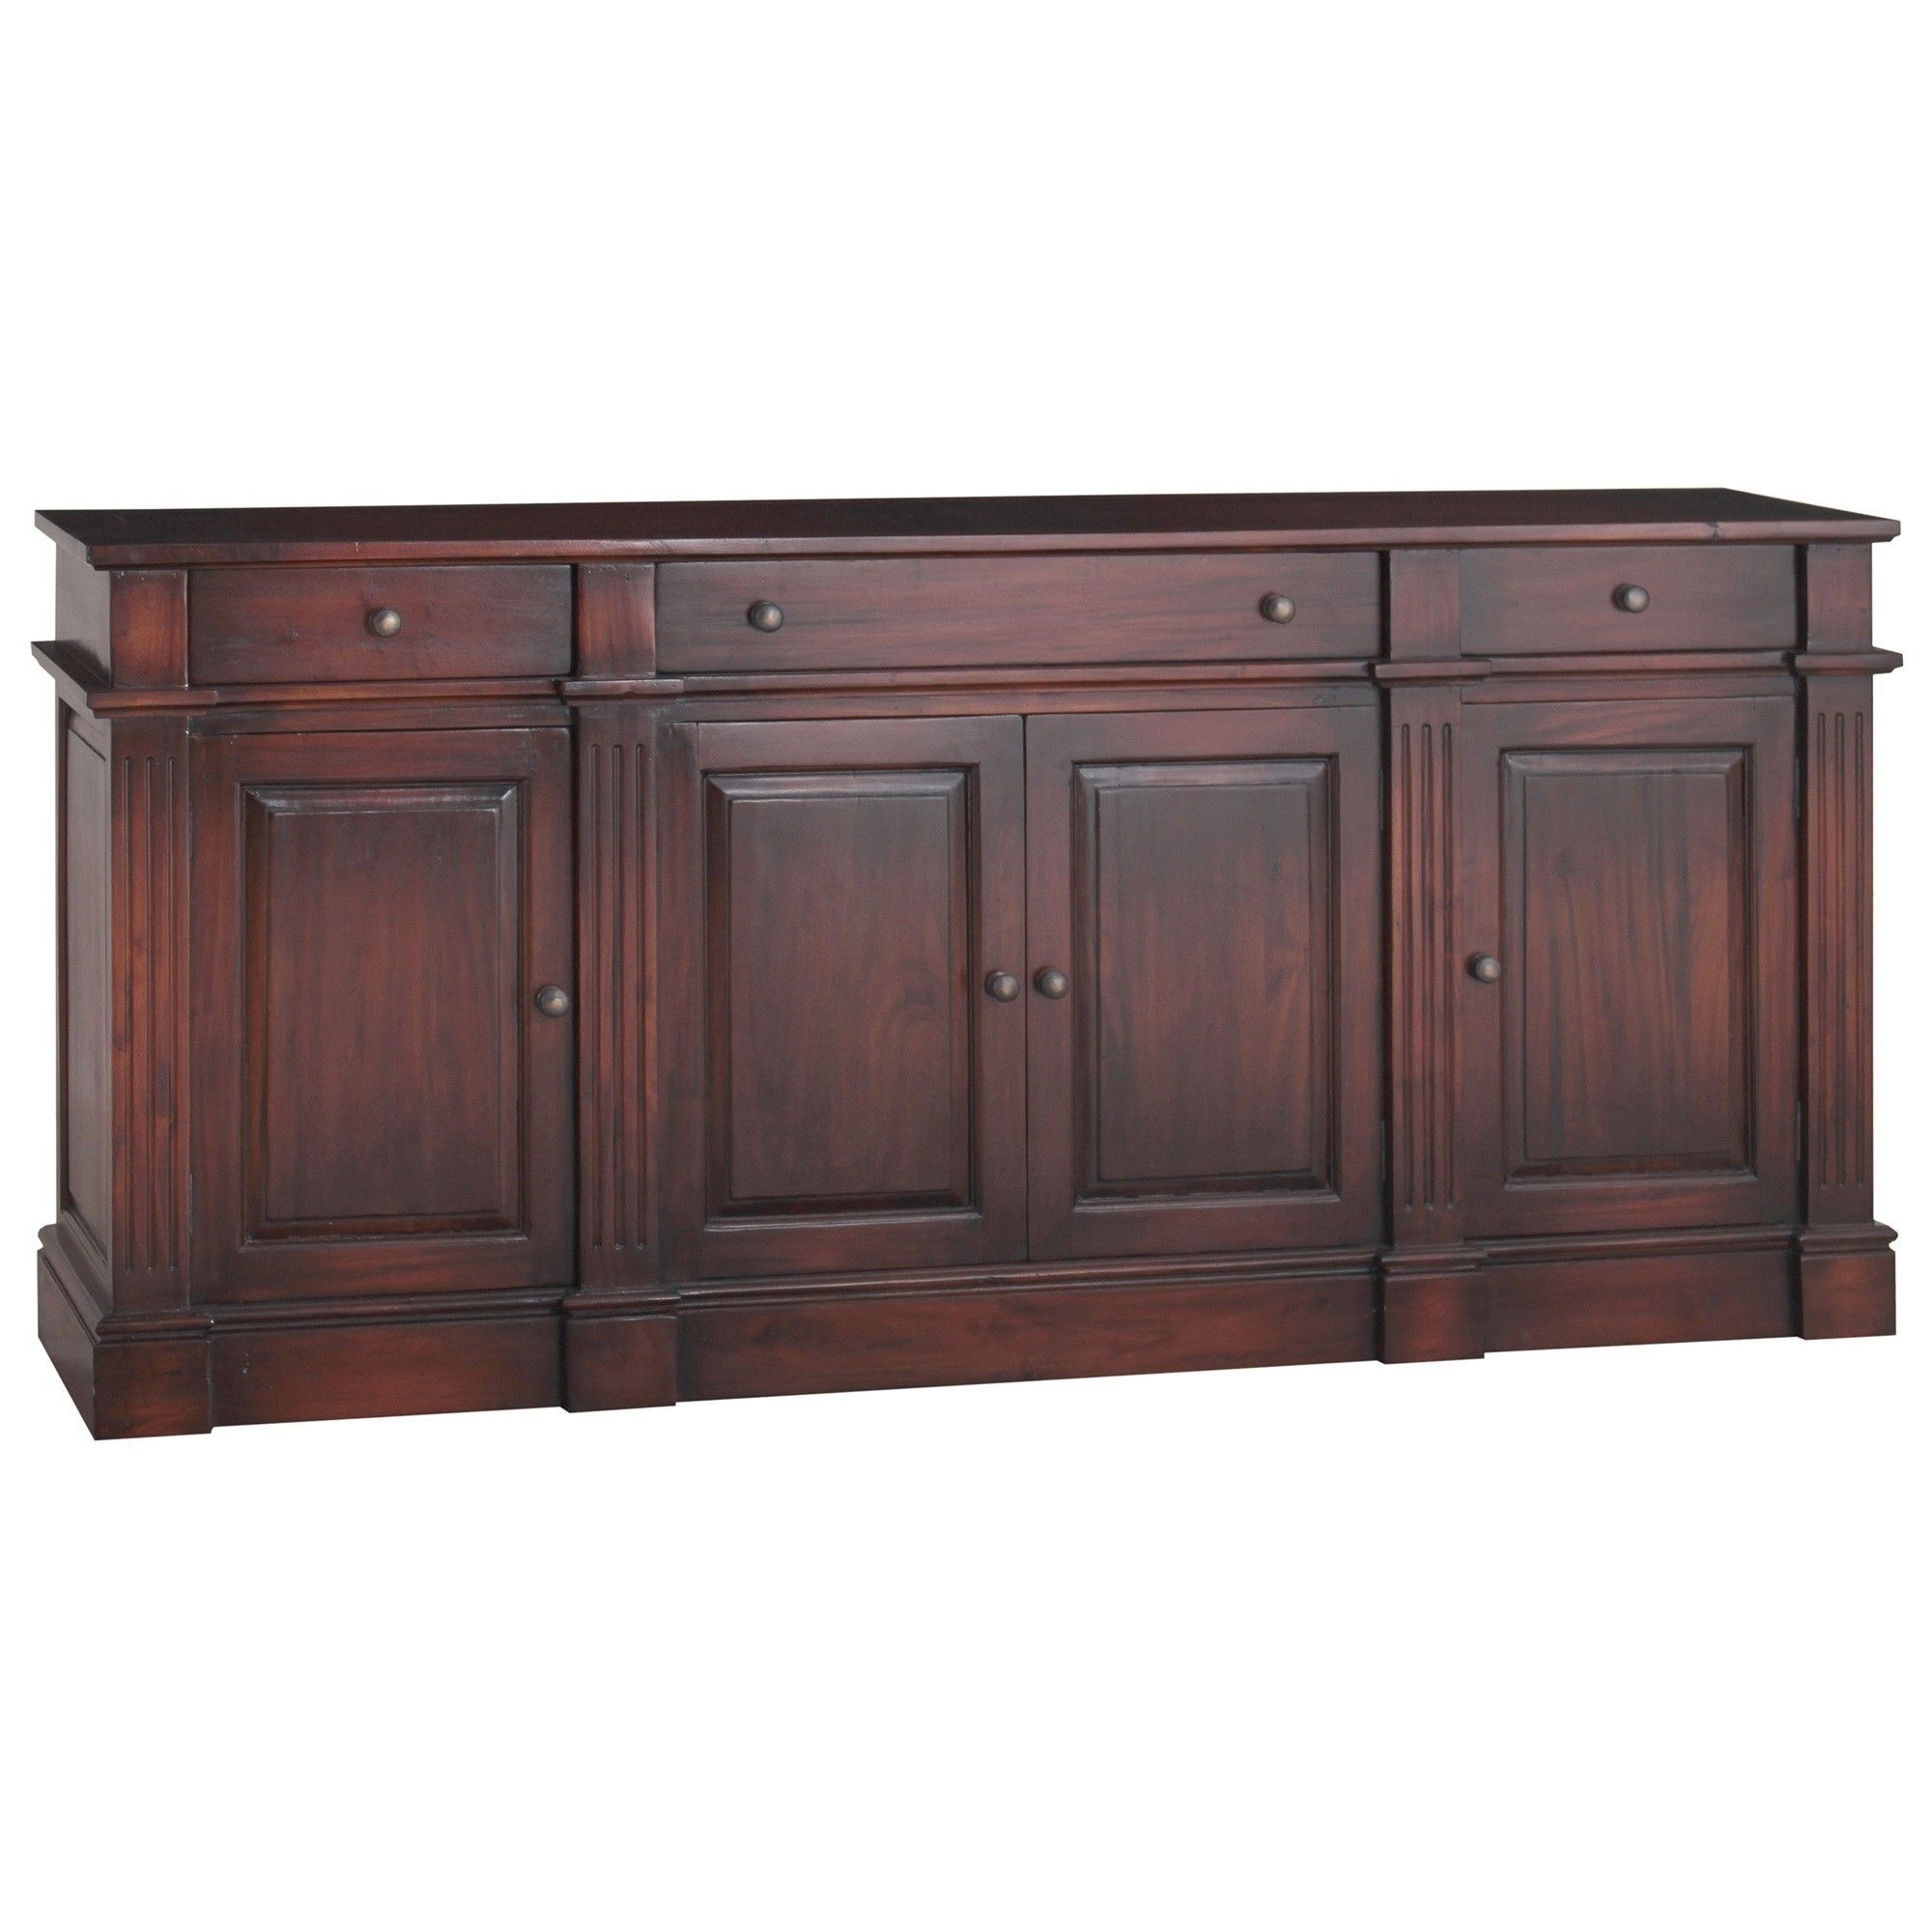 Laurel Solid Mahogany Timber 4 Door 3 Drawer Sideboard, 198cm, Aged Within Latest Aged Mirrored 4 Door Sideboards (View 20 of 20)